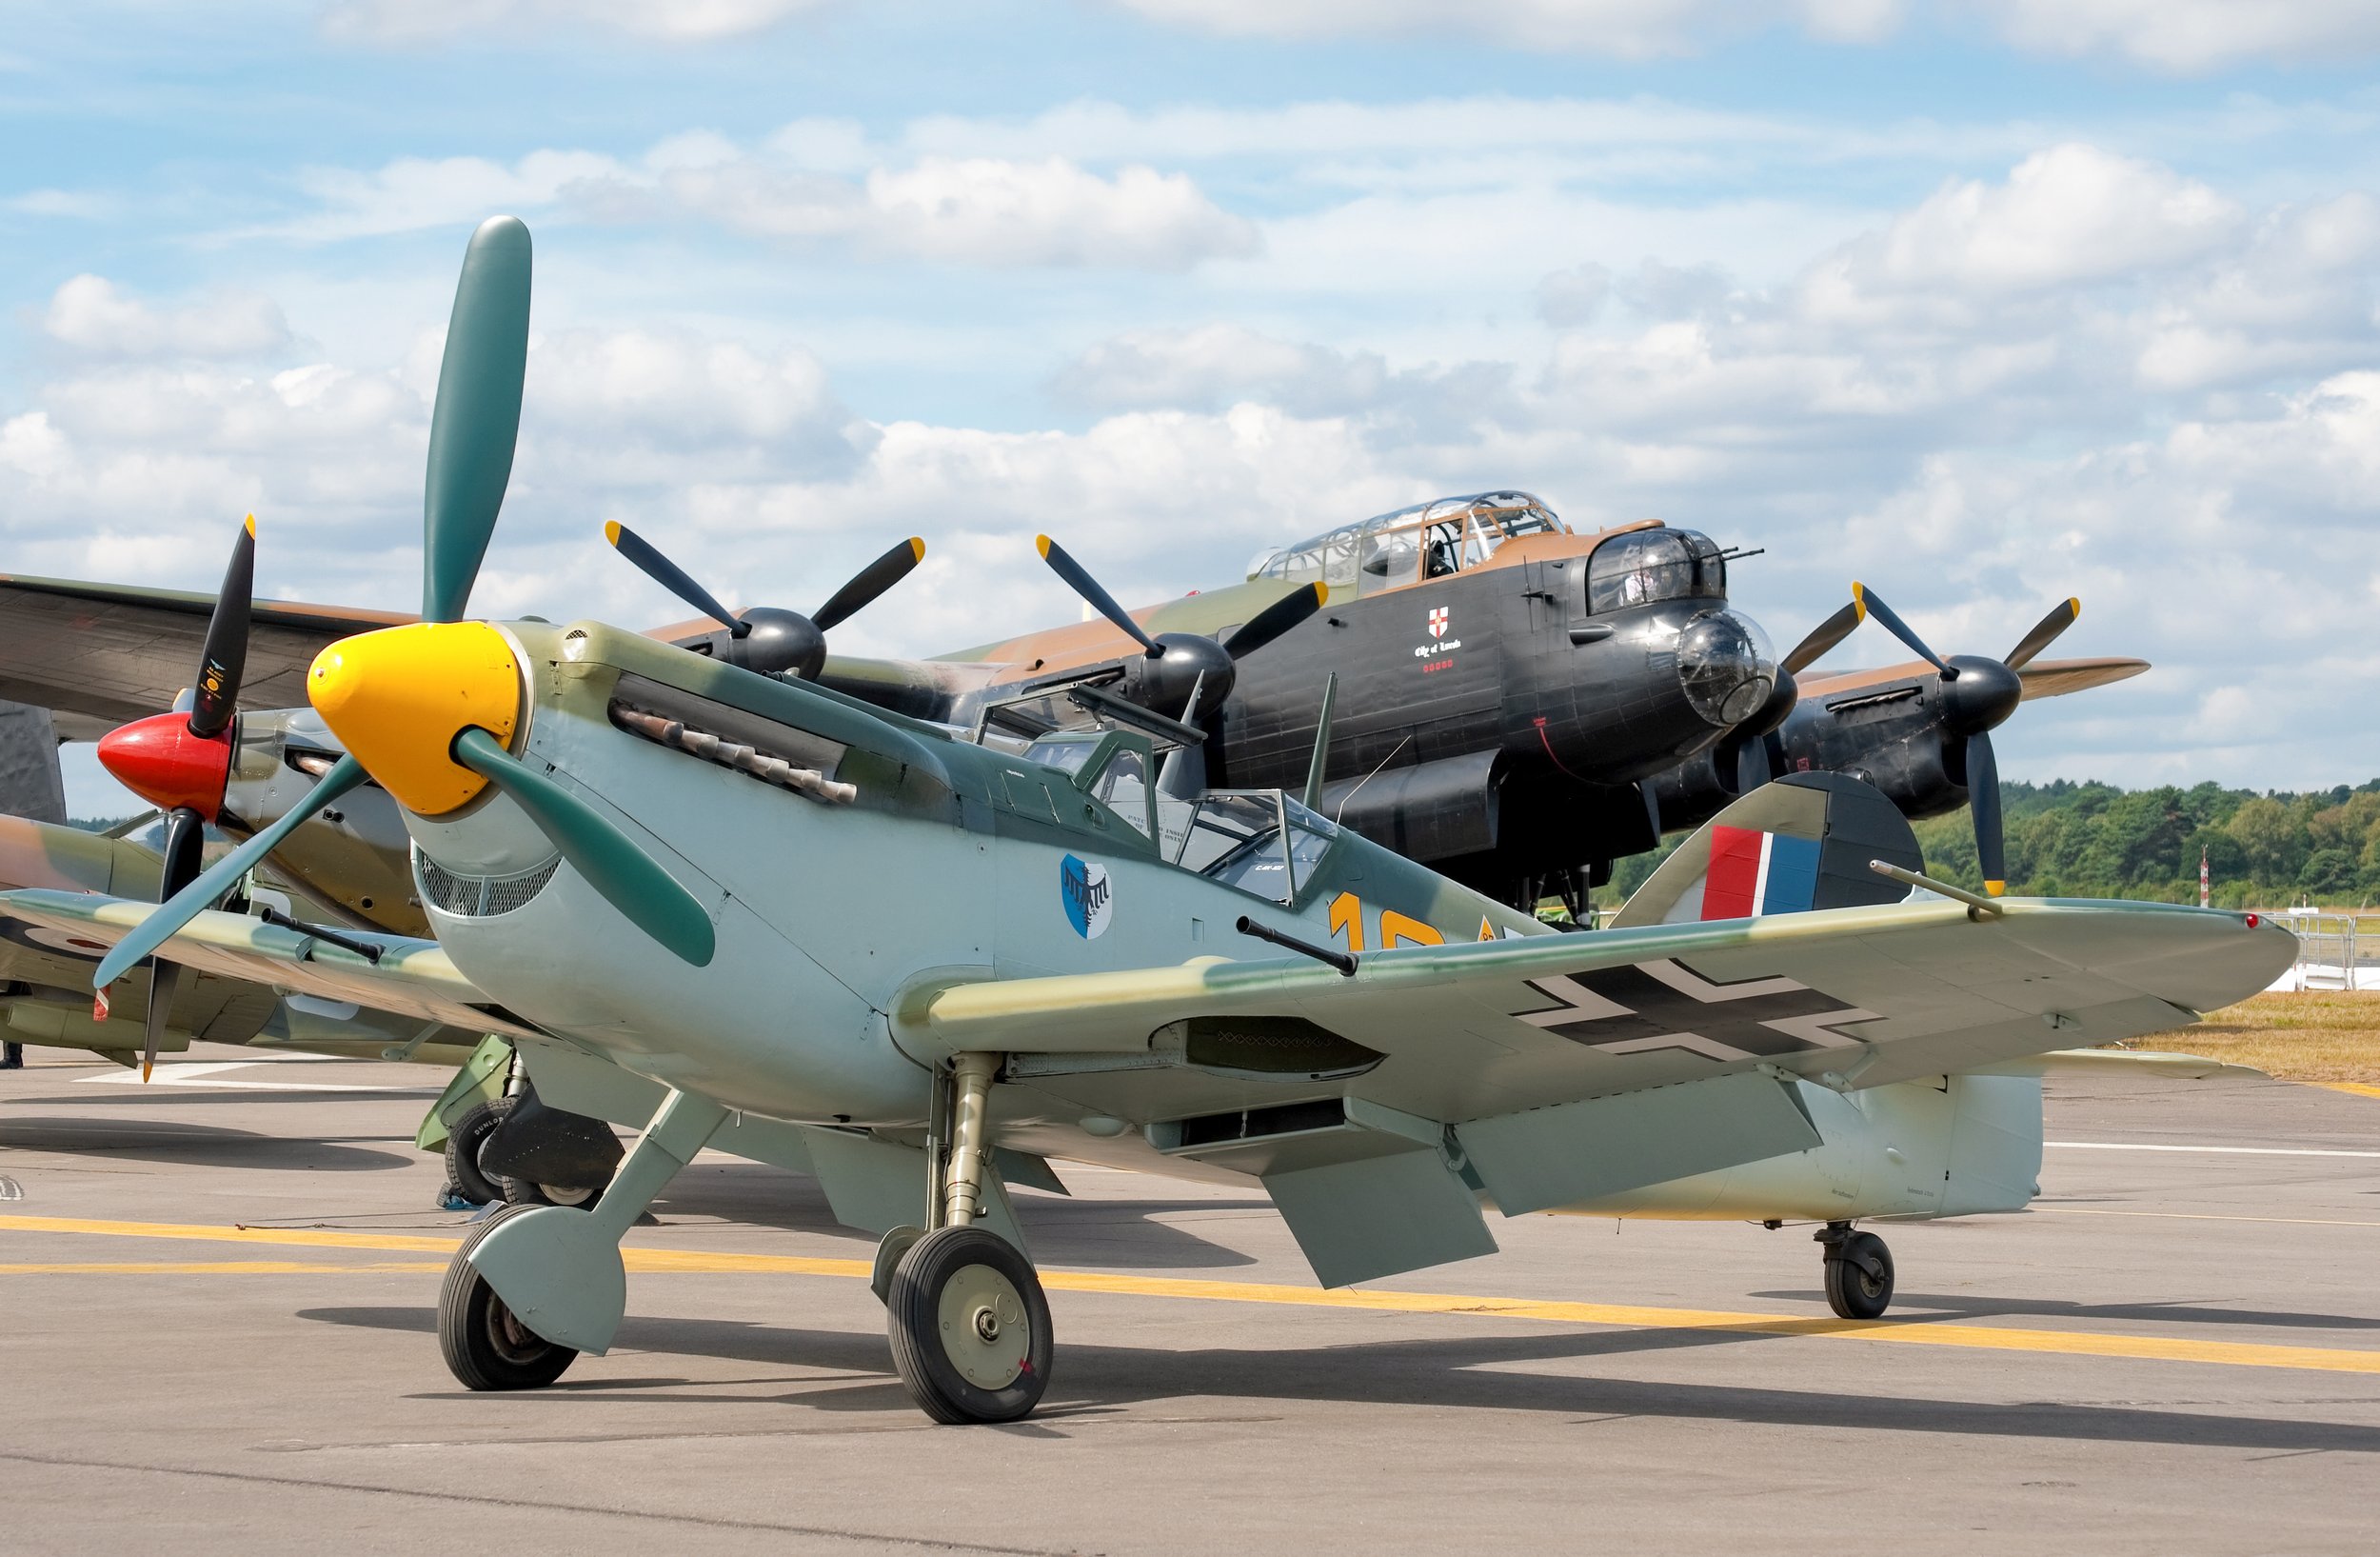 ME BF109e LTKTWunsigned 16.2.2023 AdobeStock_298263369_Editorial_Use_Only.jpeg